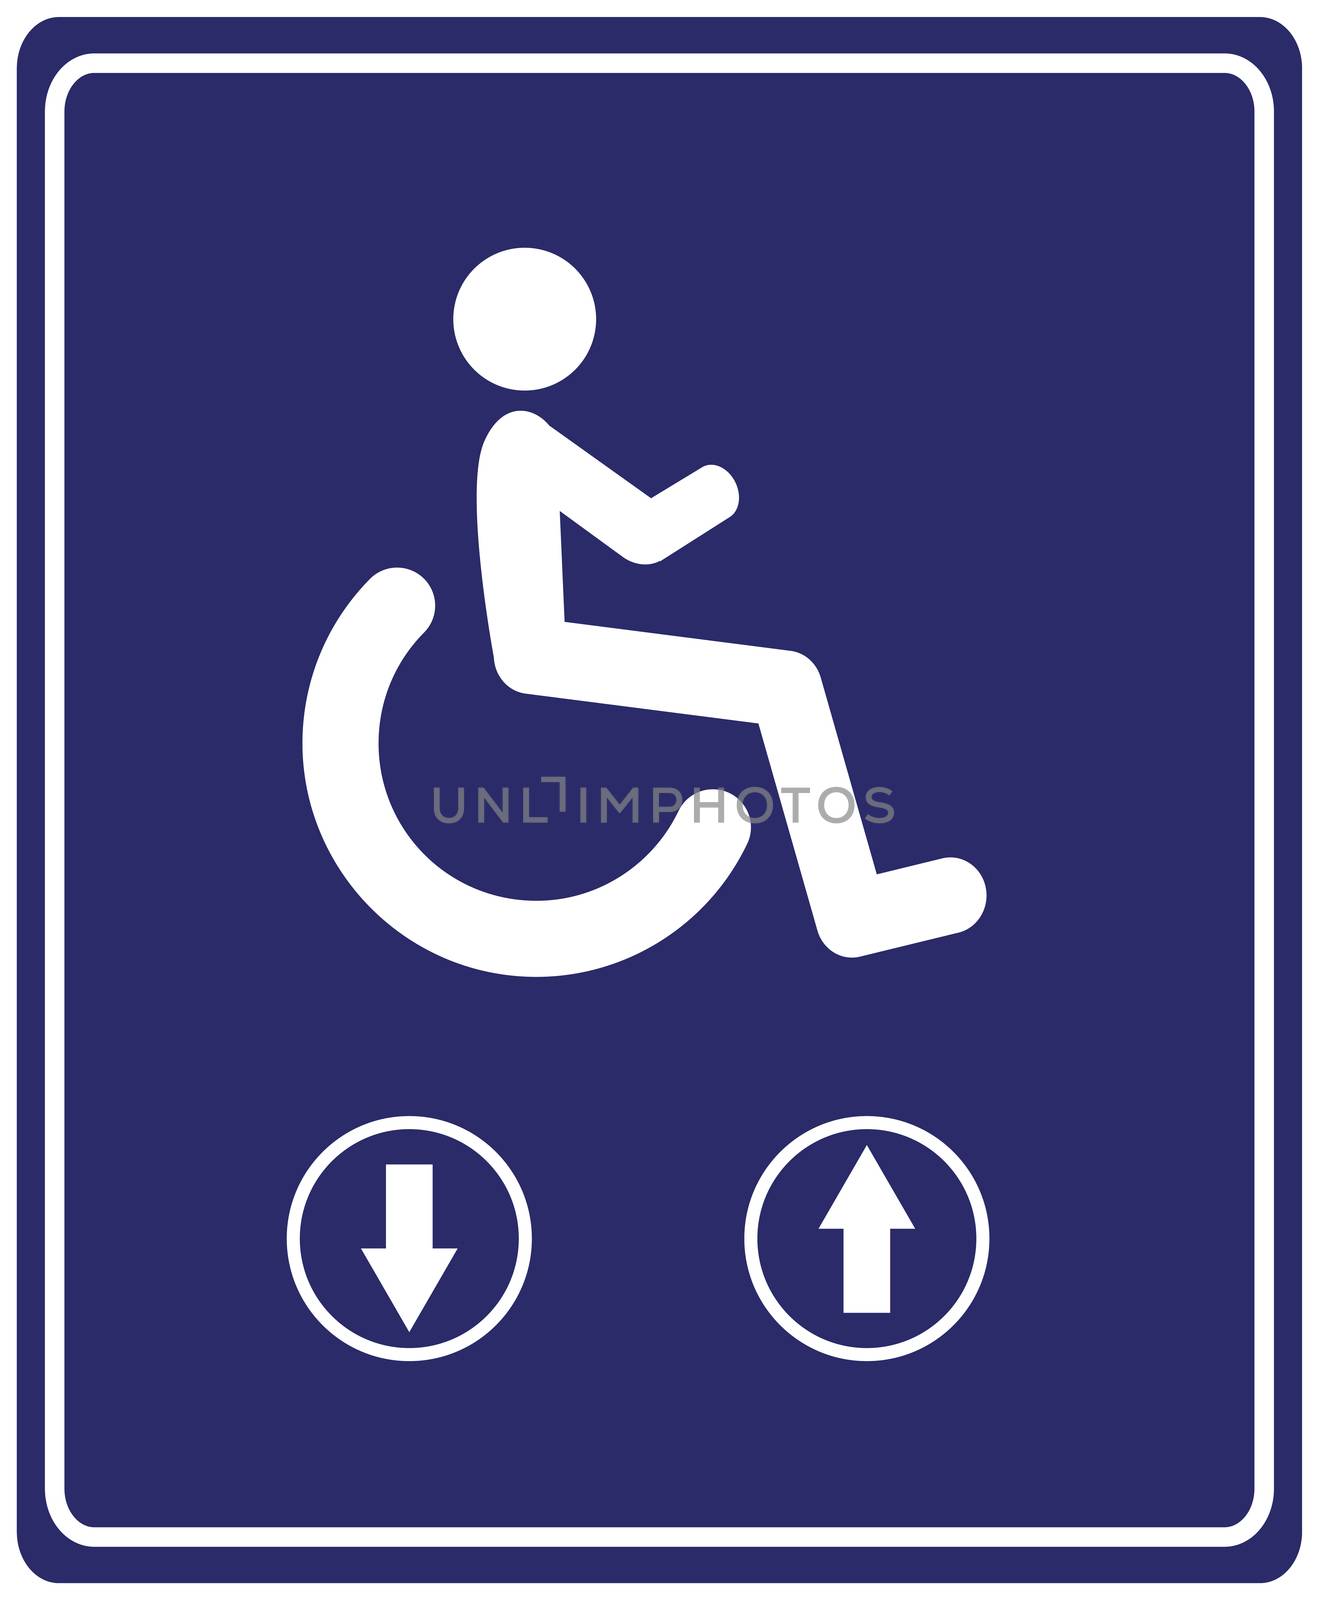 Elevator for Wheelchair User by Bambara